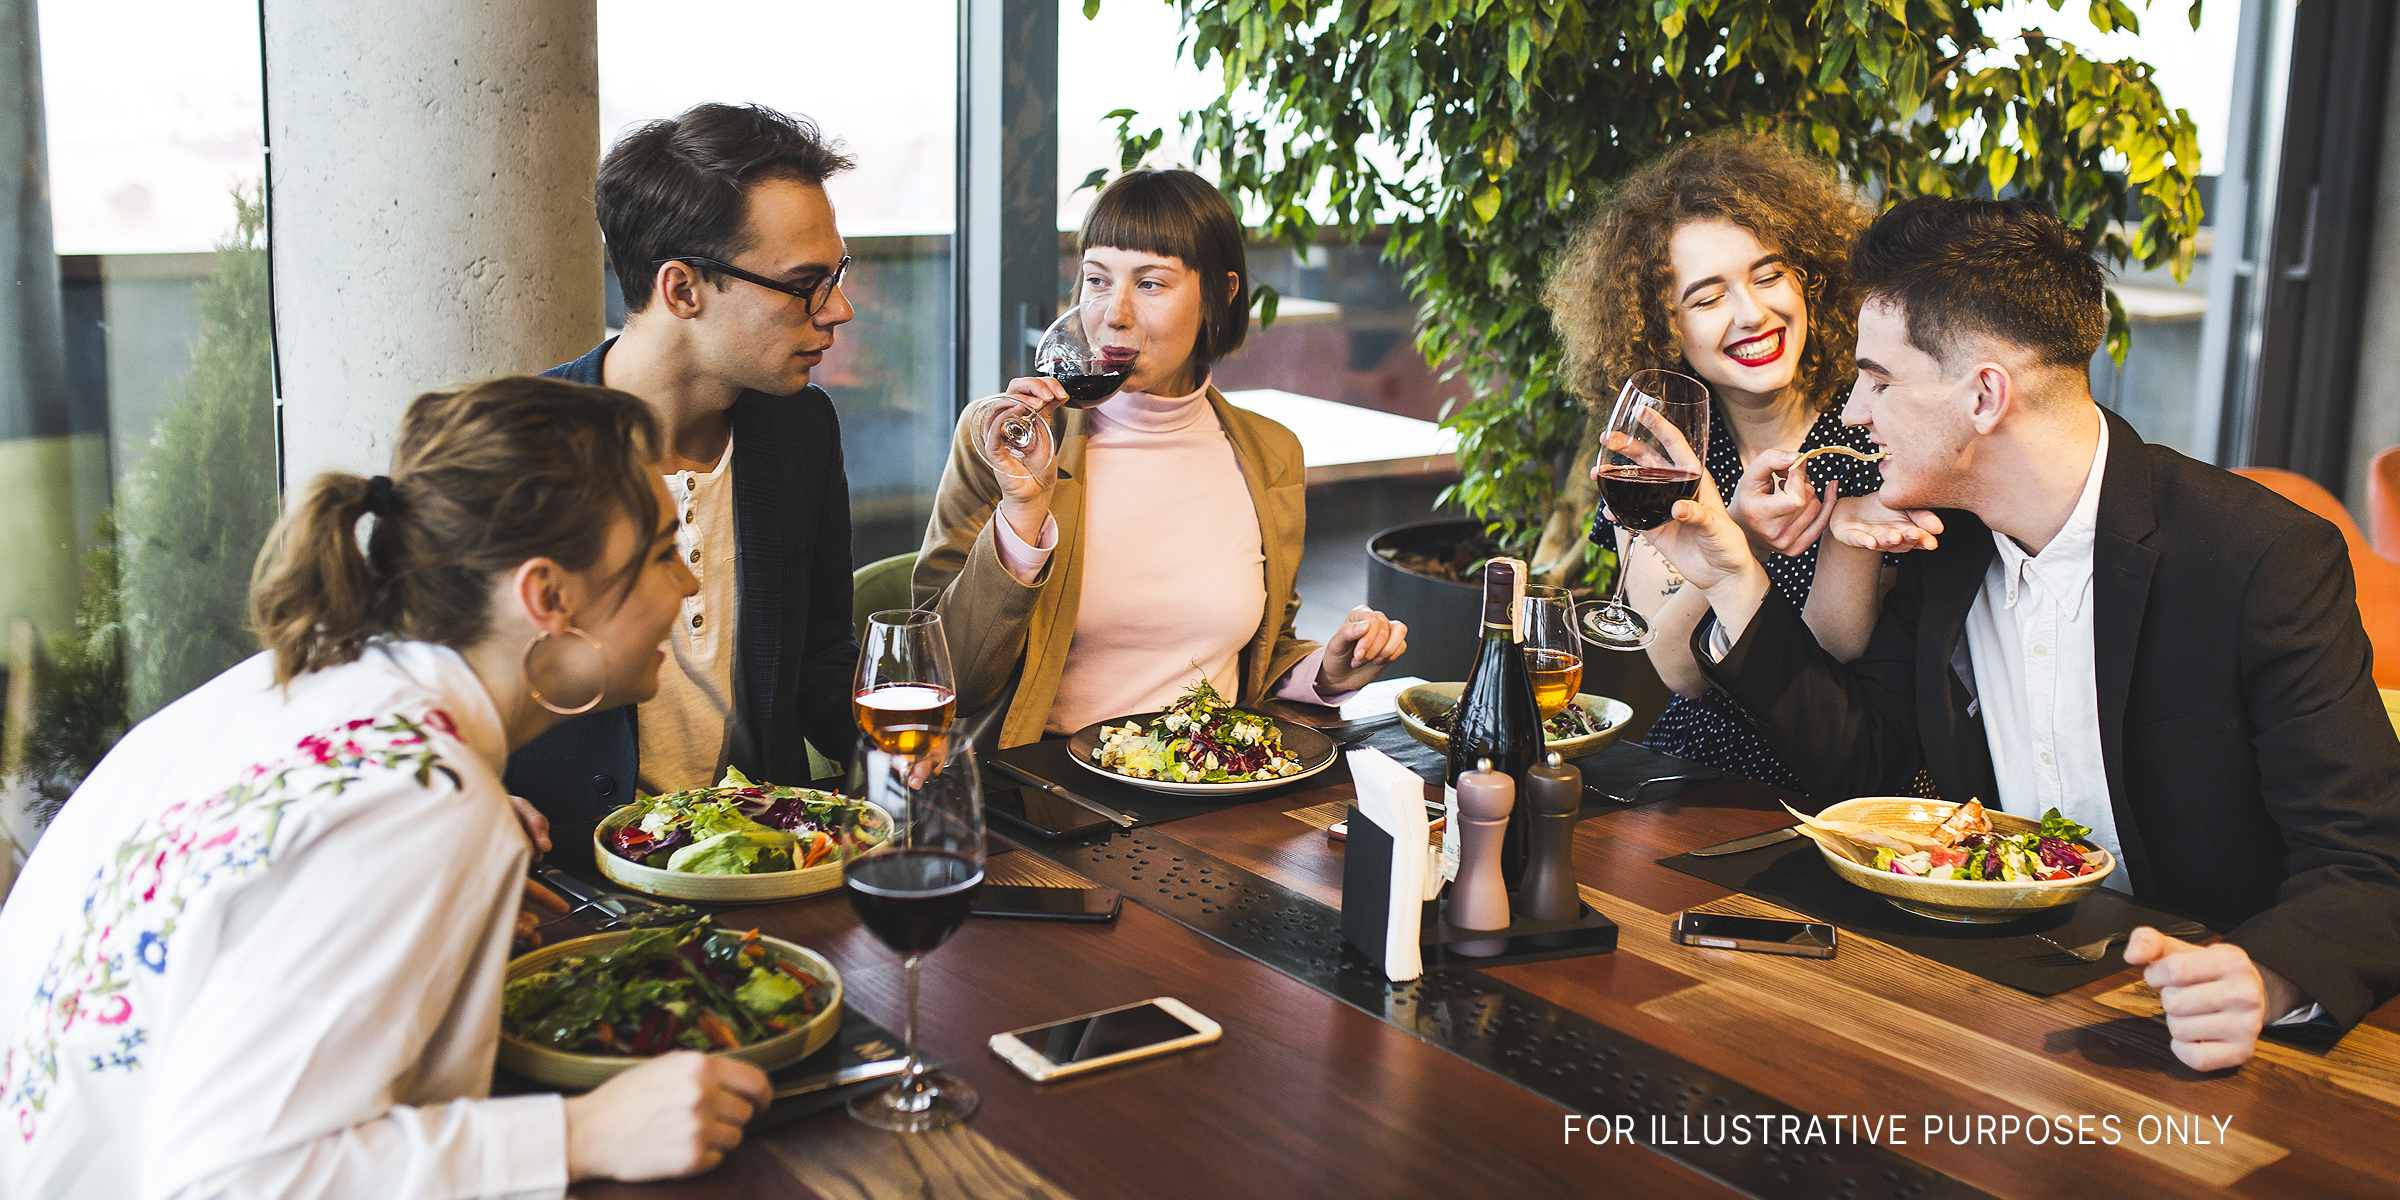 A group of friends eating in a restaurant | Source: Freepik